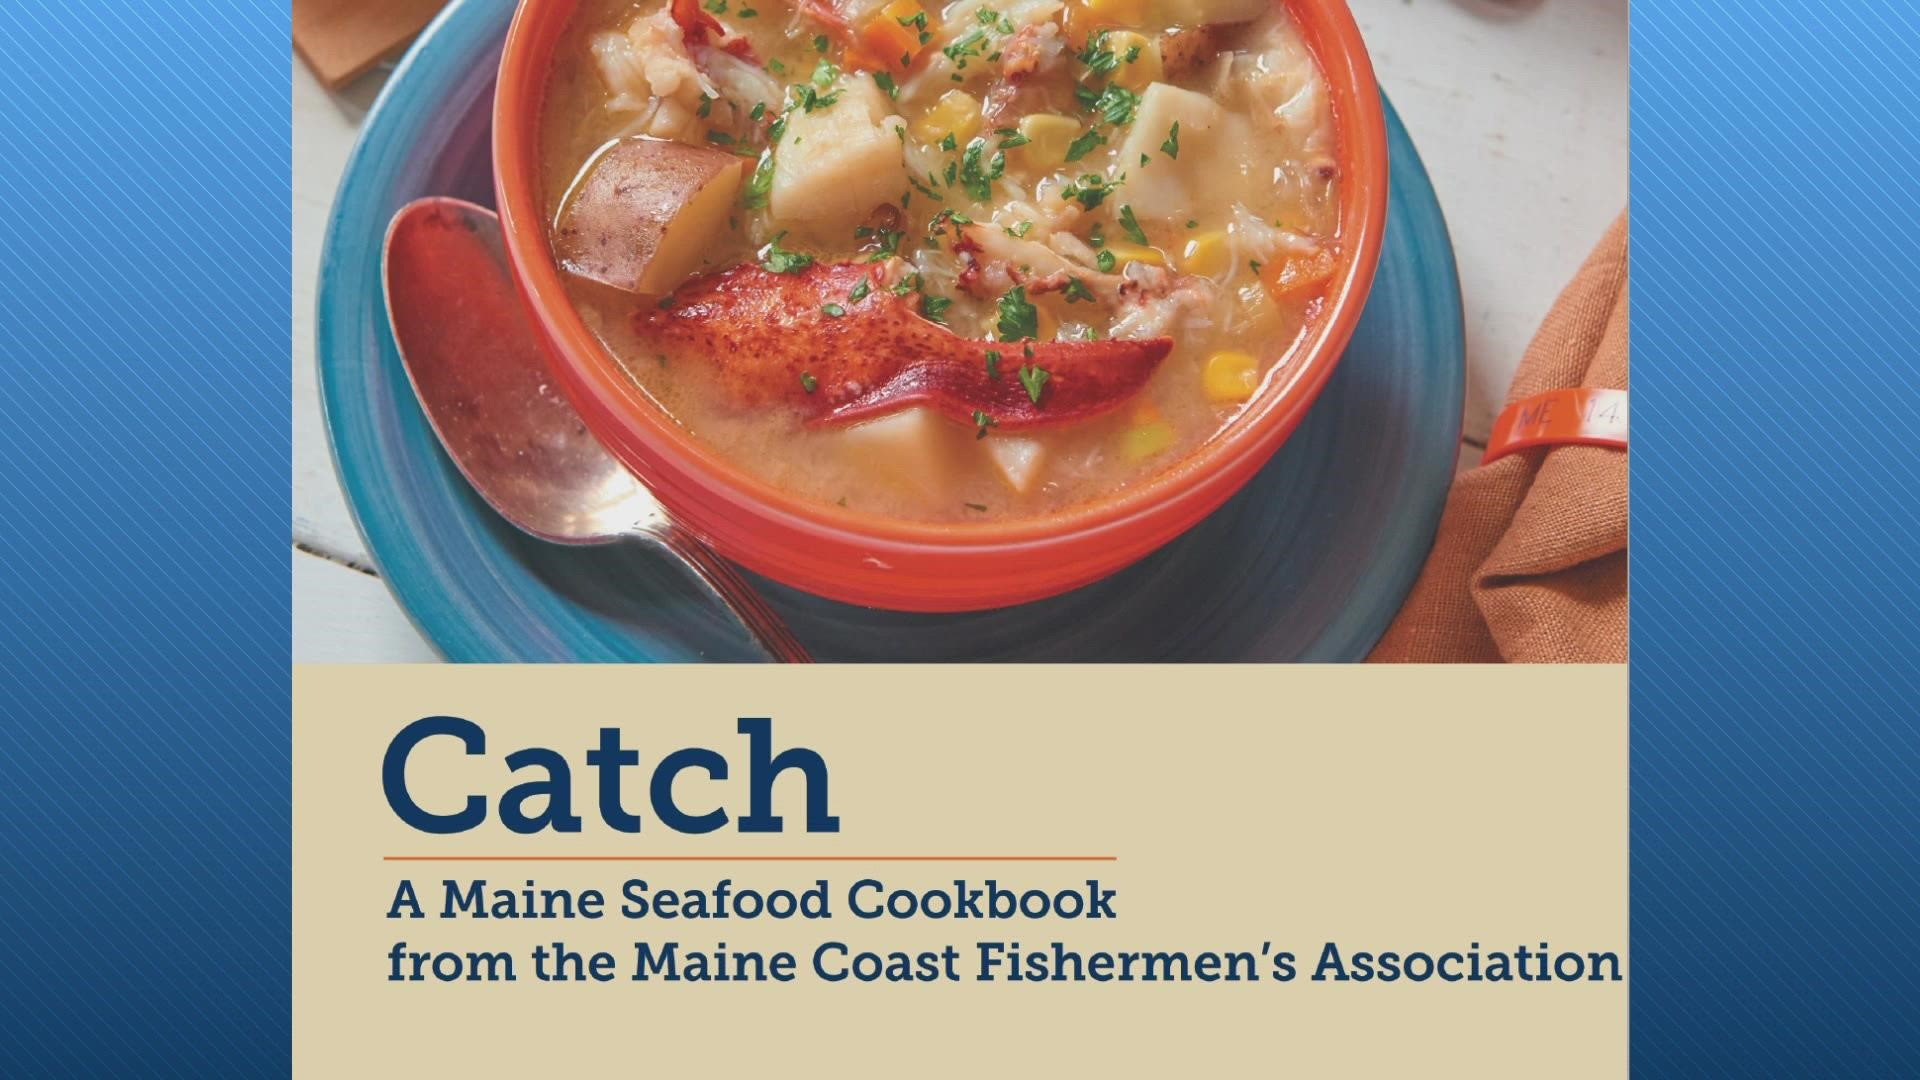 The recipes are tried-and-true favorites, crowd-sourced from across the state.